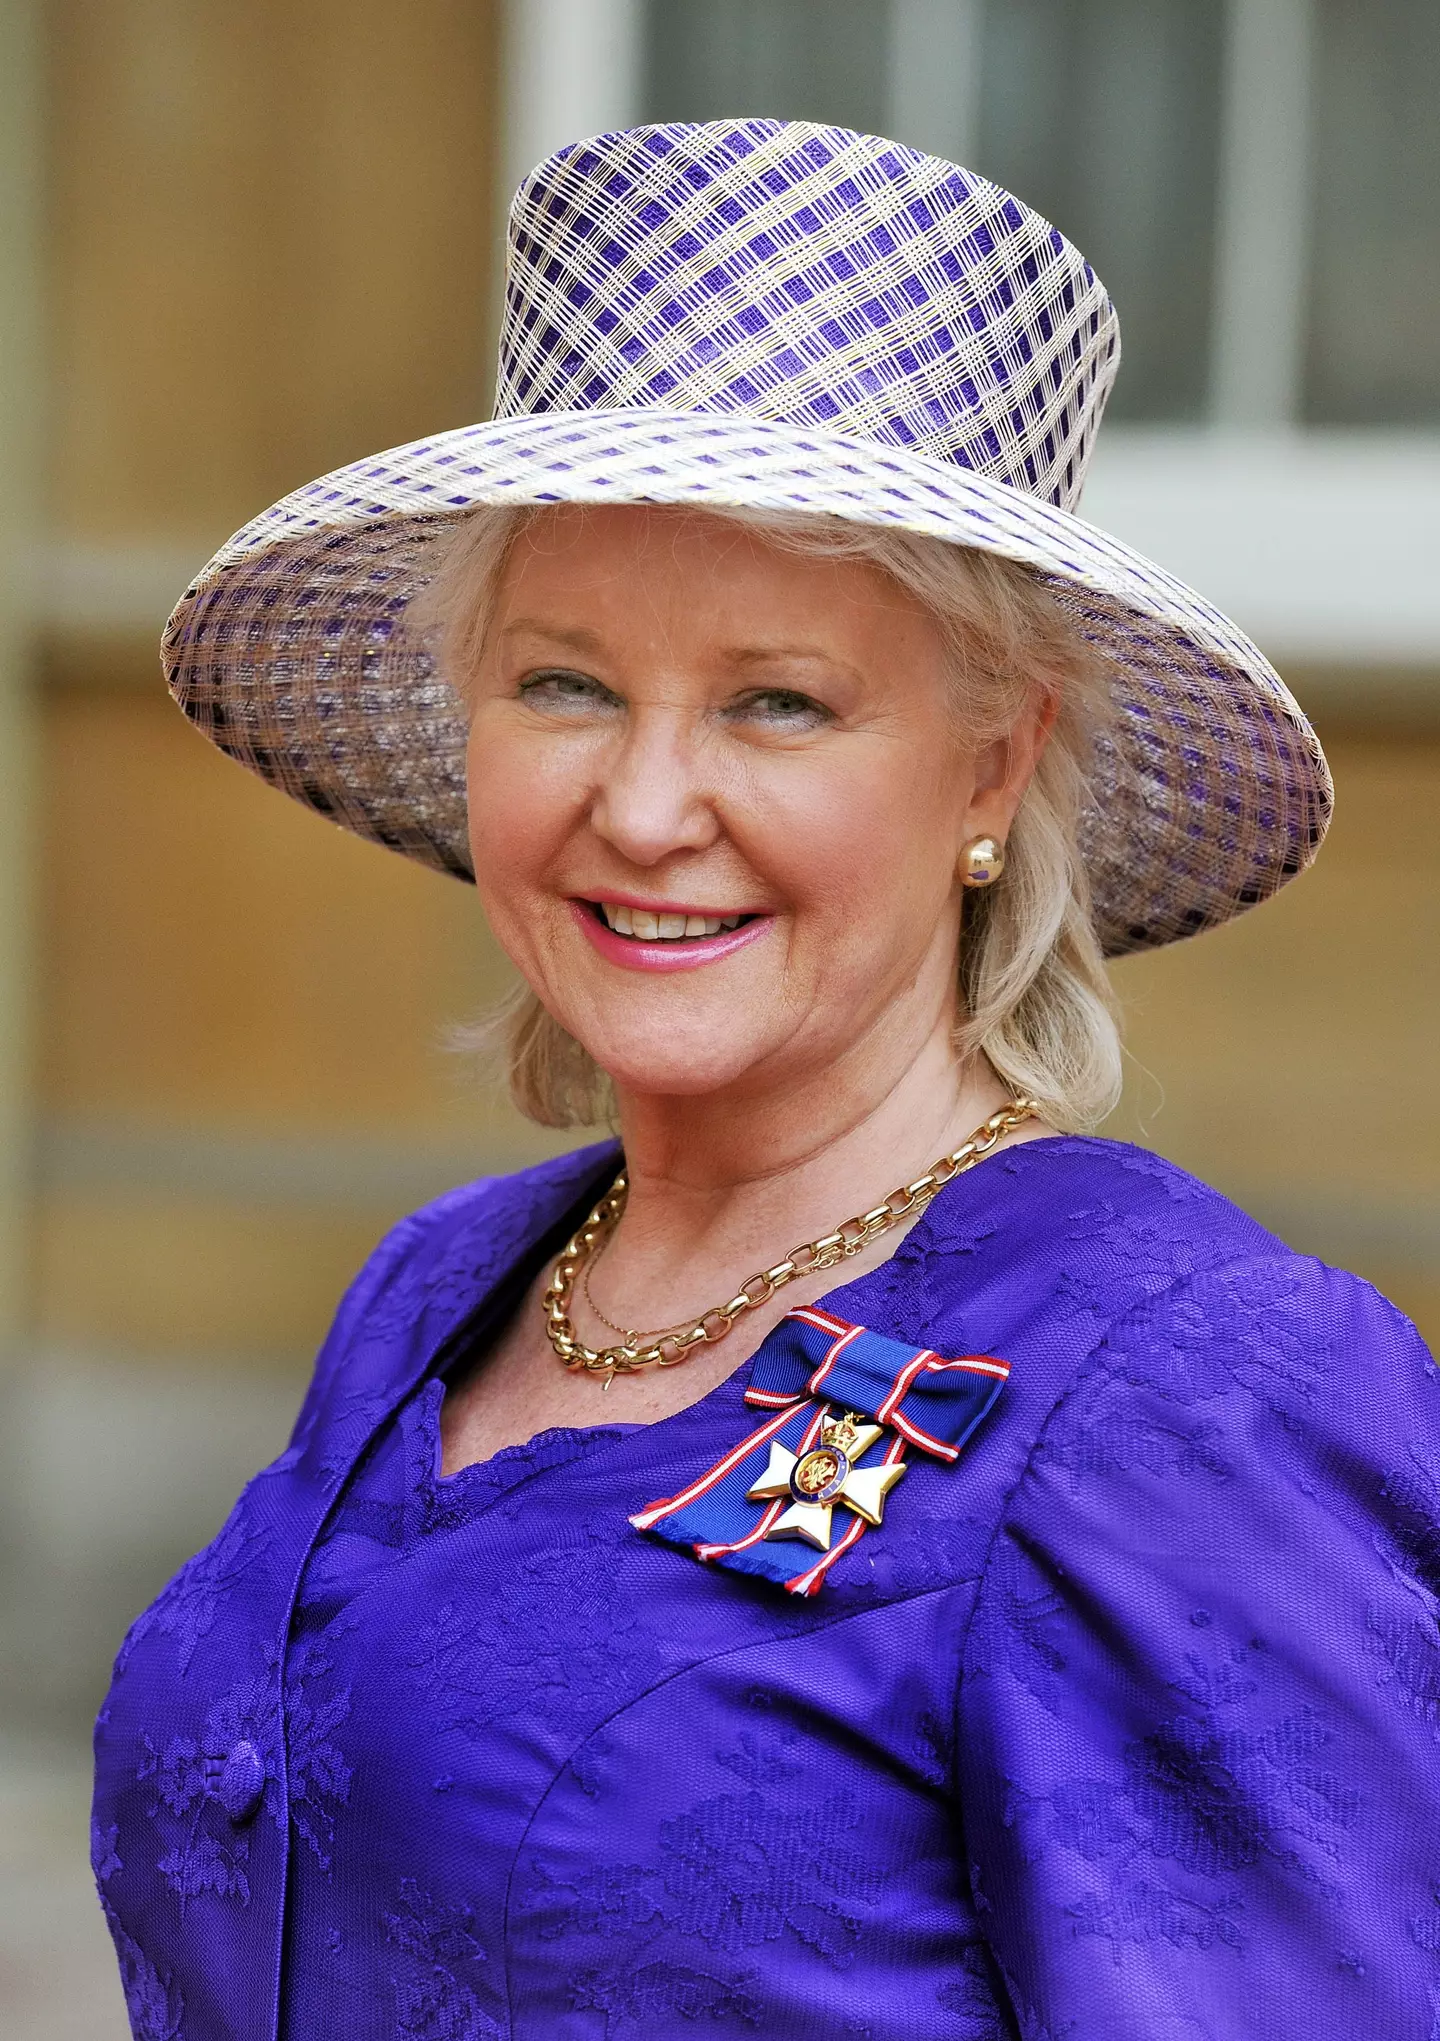 Angela Kelly was presented with a Royal Victorian Order medal by the Queen.